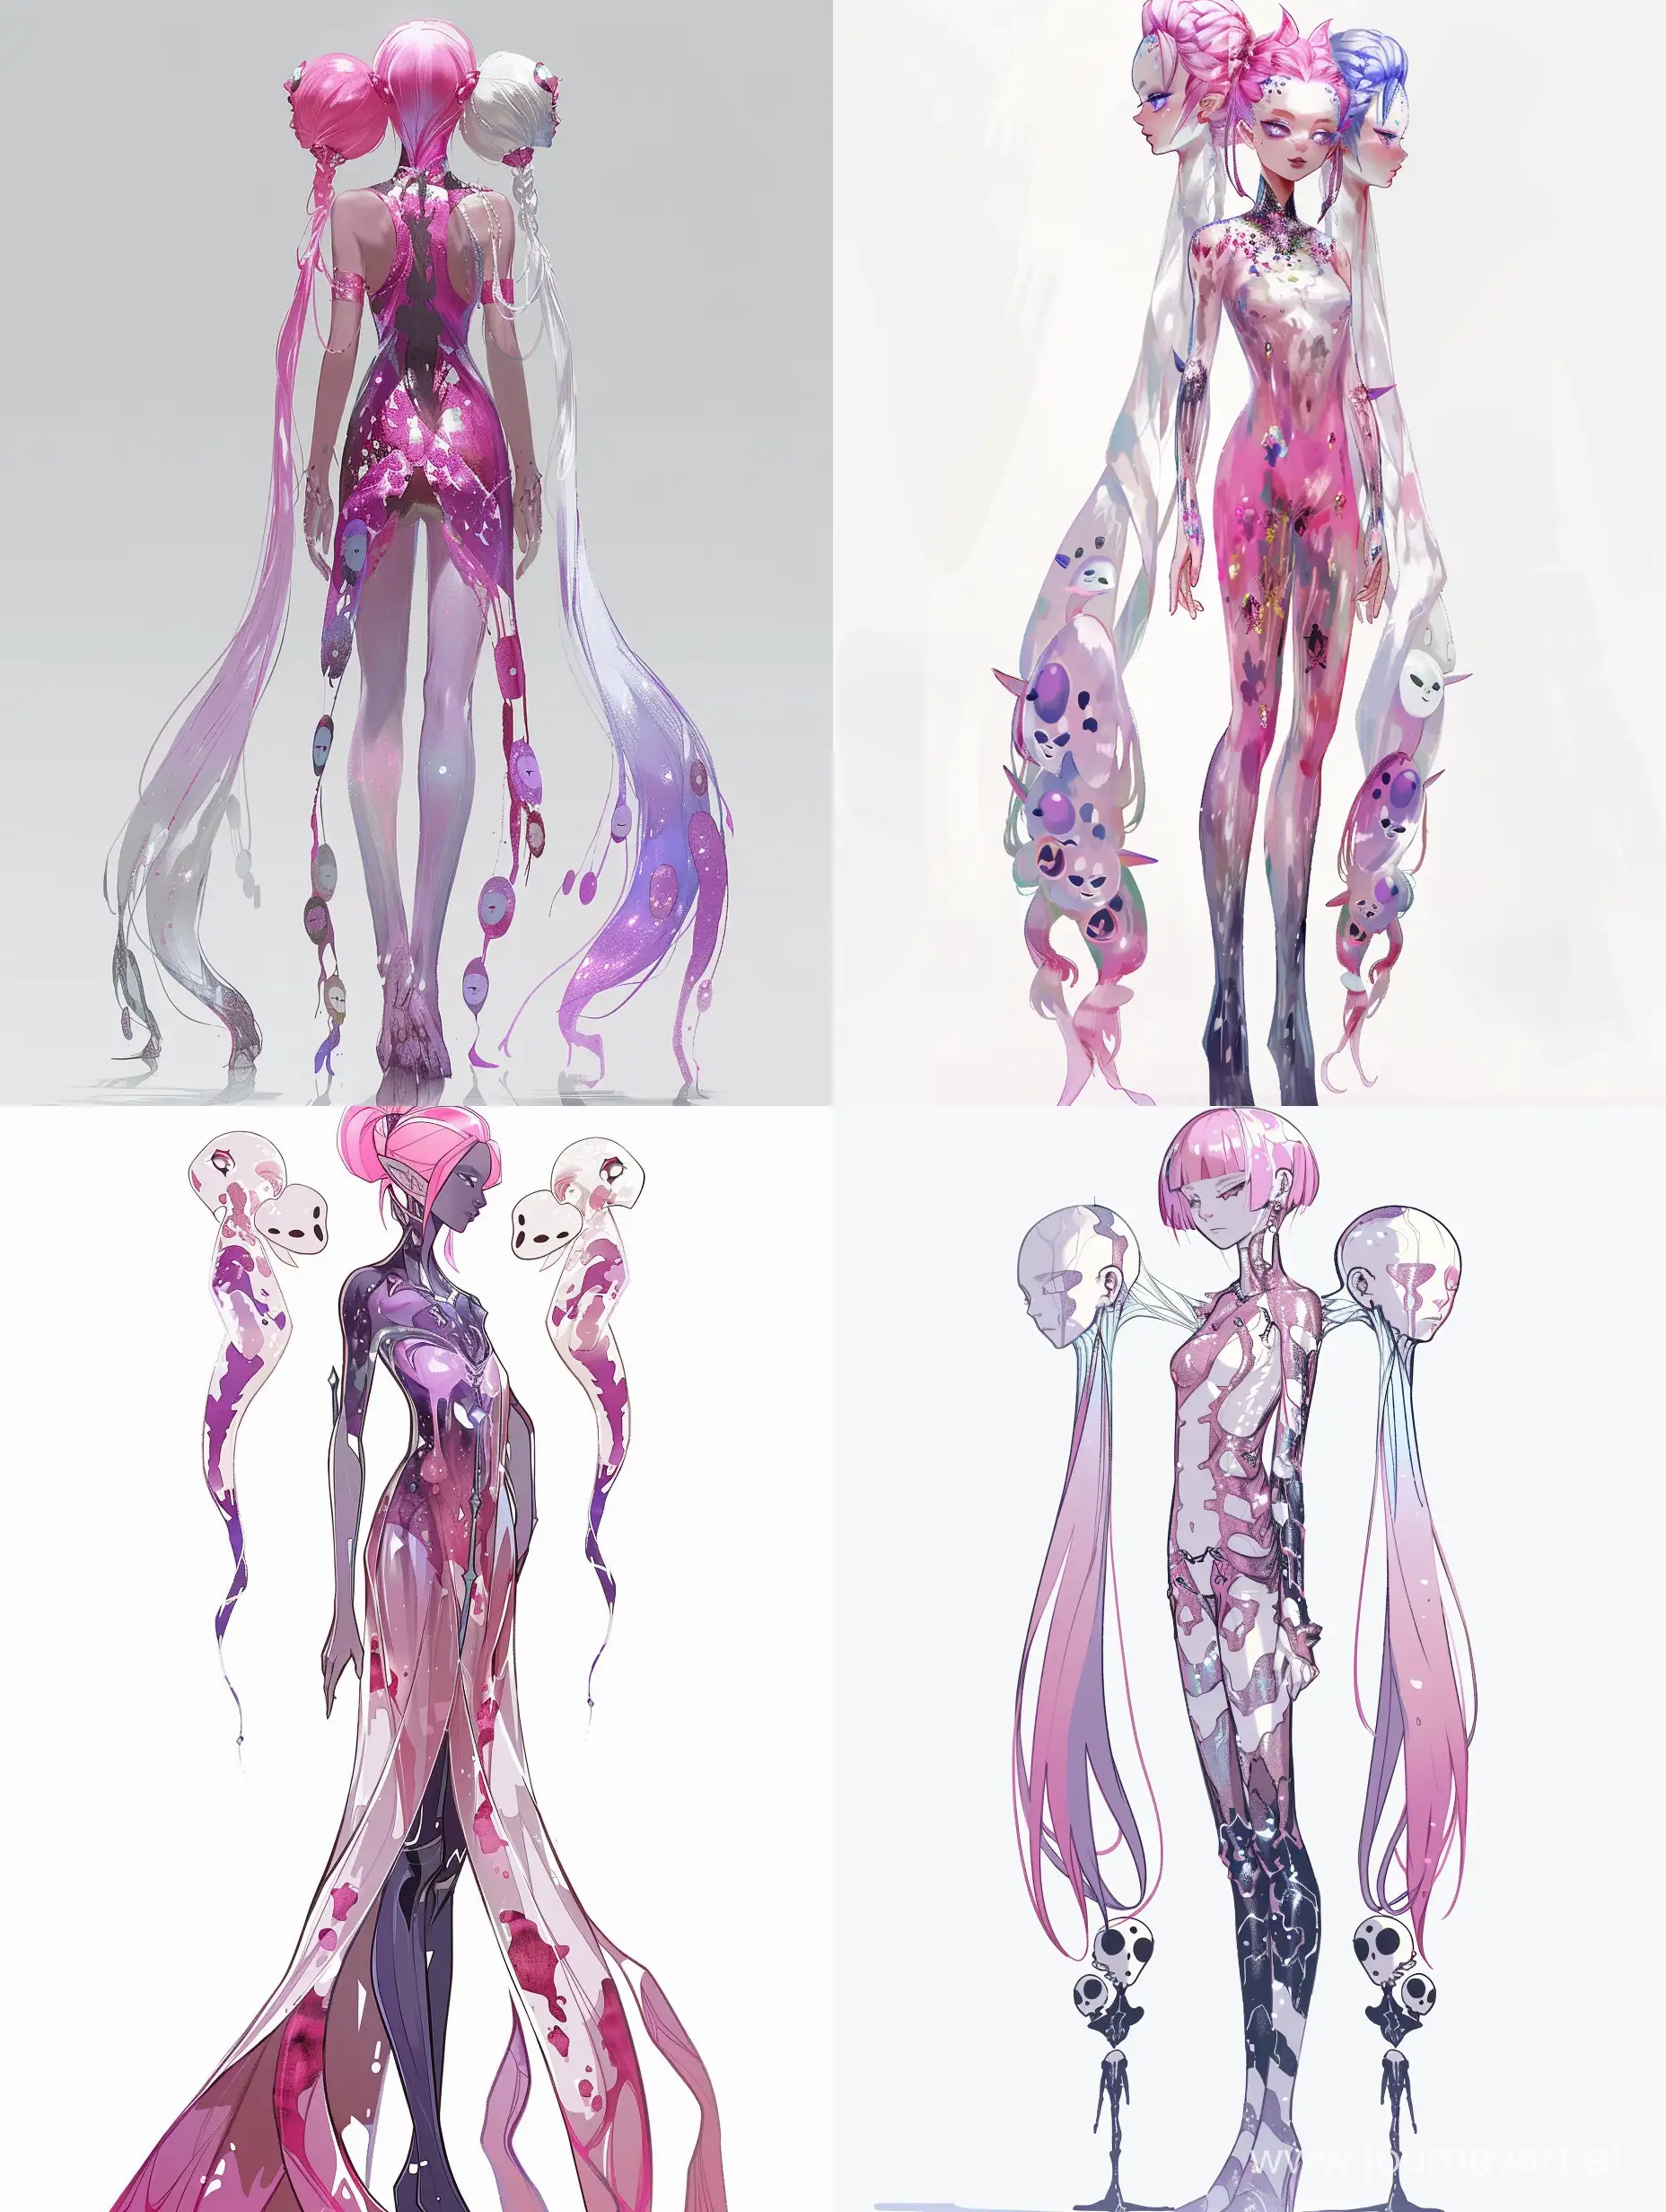 Made in a good-looking creative art style, semi-realism, or anime. With fantasy motifs.

Create an OC with : pink, purple, white color pallet. She has one body, but three twin heads sharing one neck, like Siamese twins, tall, wears a semi-transparent shiny dress with many prints in the shape of spirits-like faces at the end. One head has pink hair, the second head has white hair, the third head has purple hair.